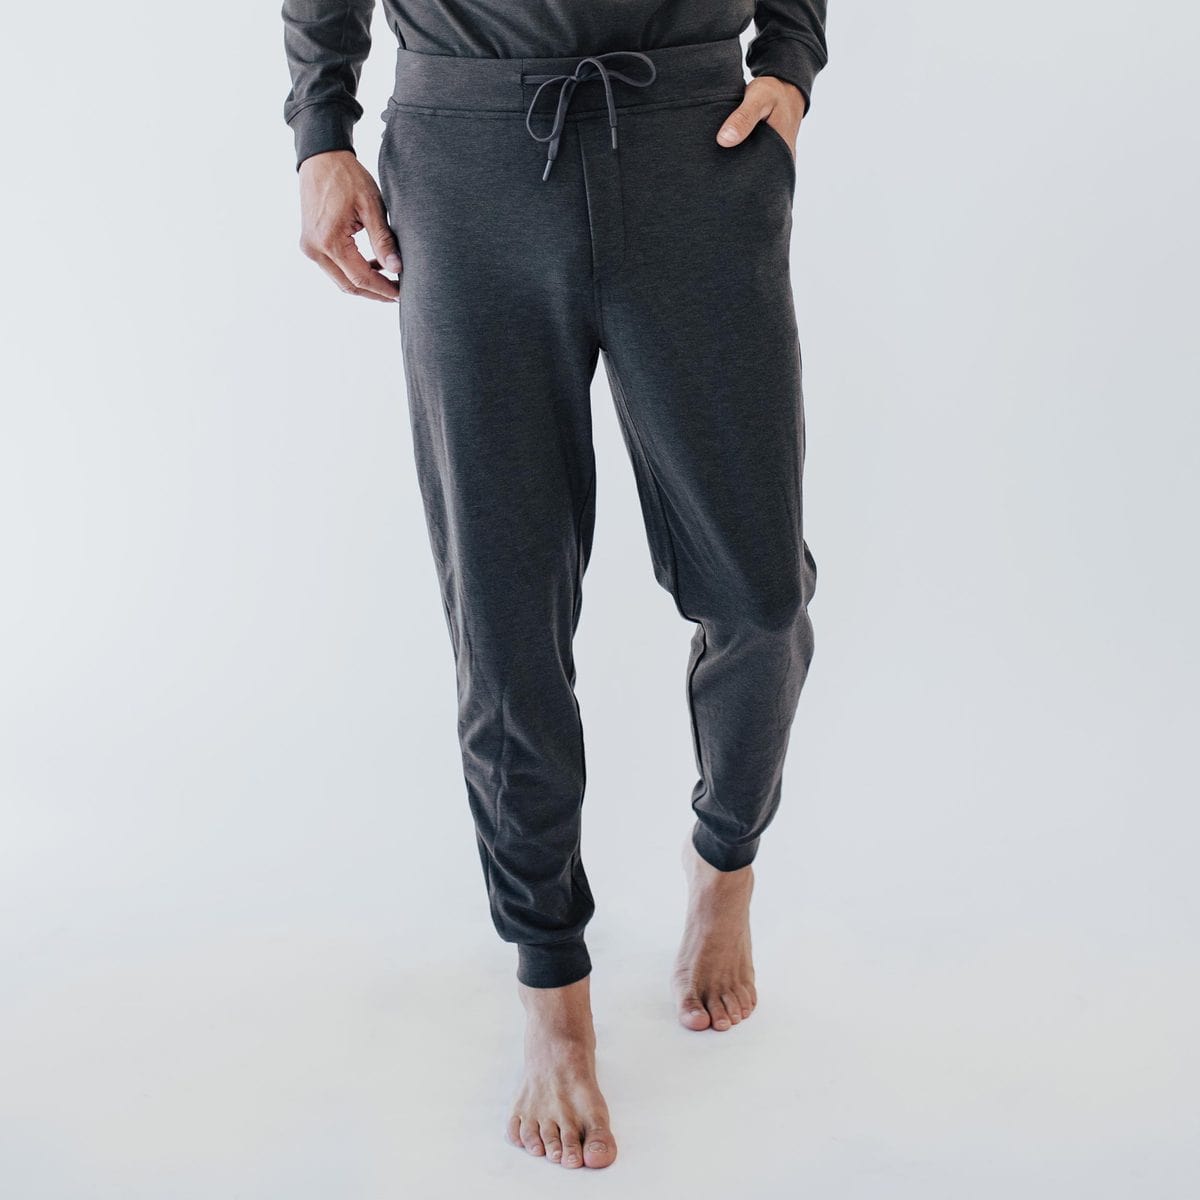 Cozy Earth Women's Bamboo Jogger Pant - Tall - Charcoal XL